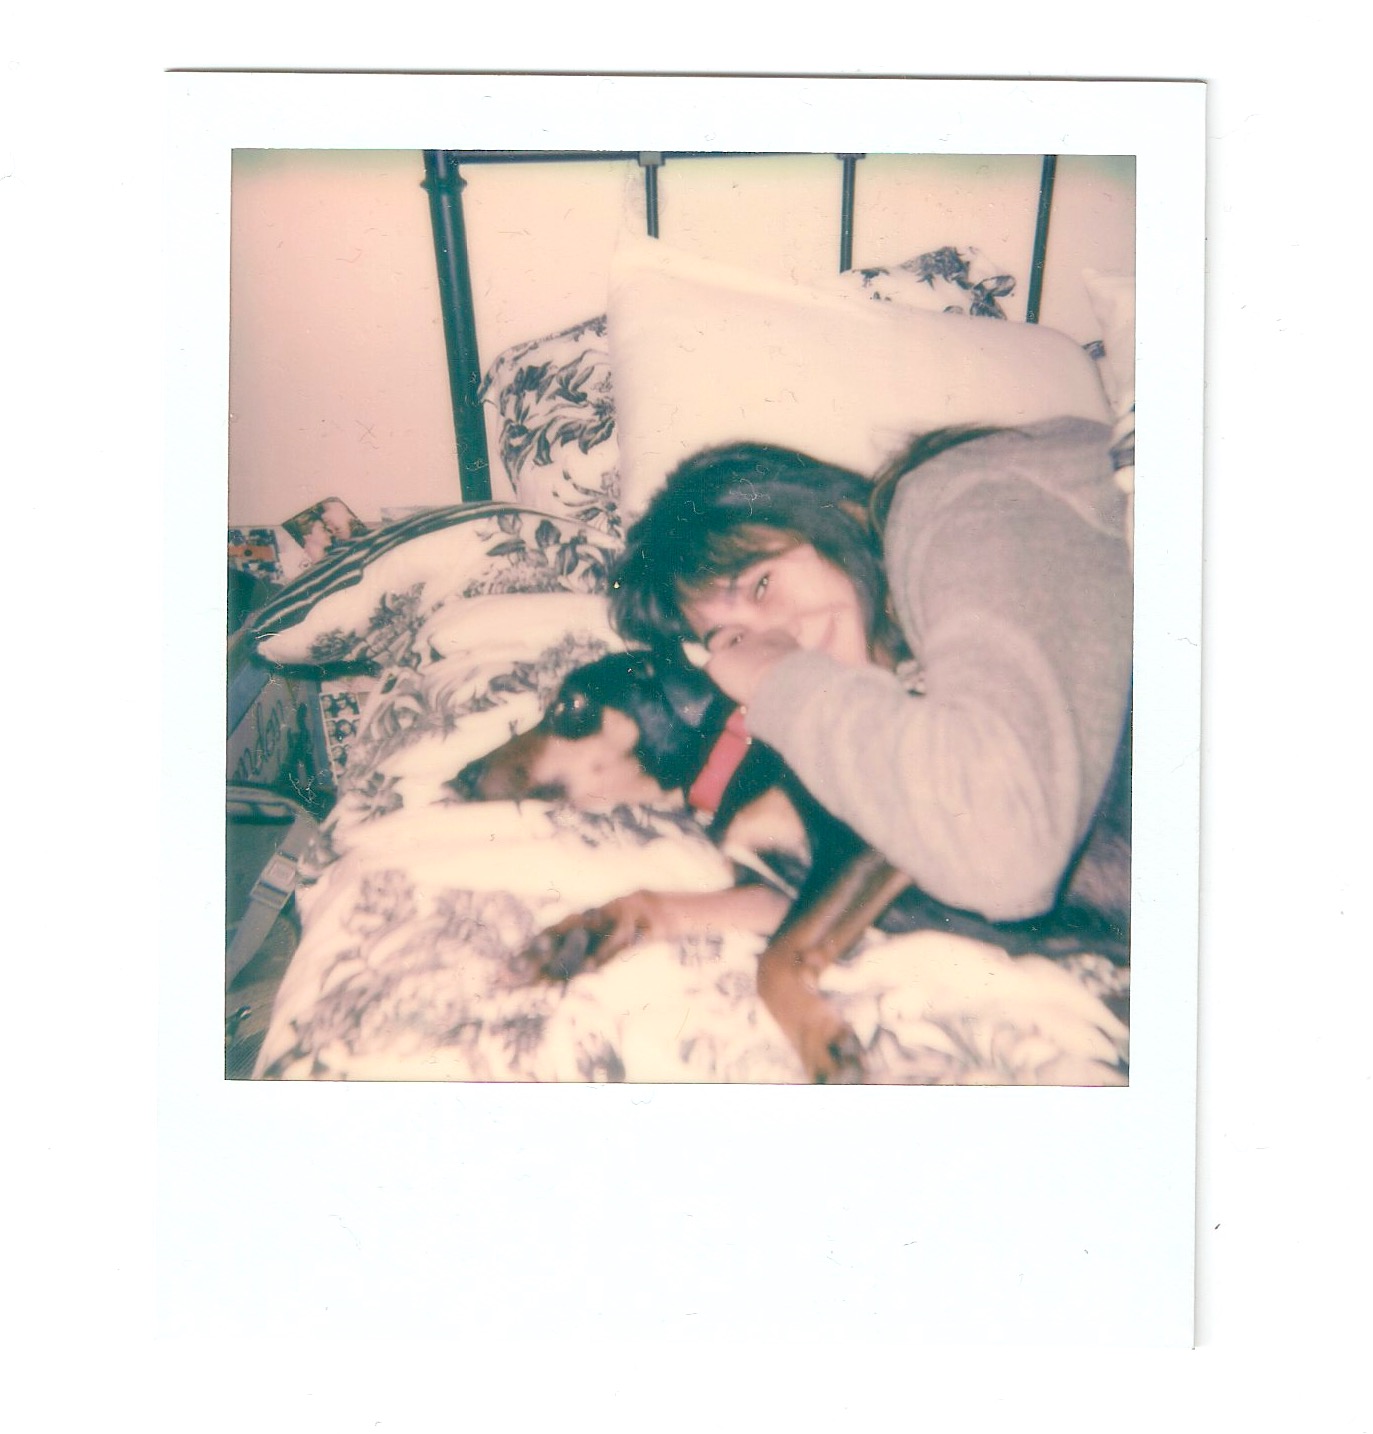 The white framed polaroid photo features a girl laying on a bed with a dog